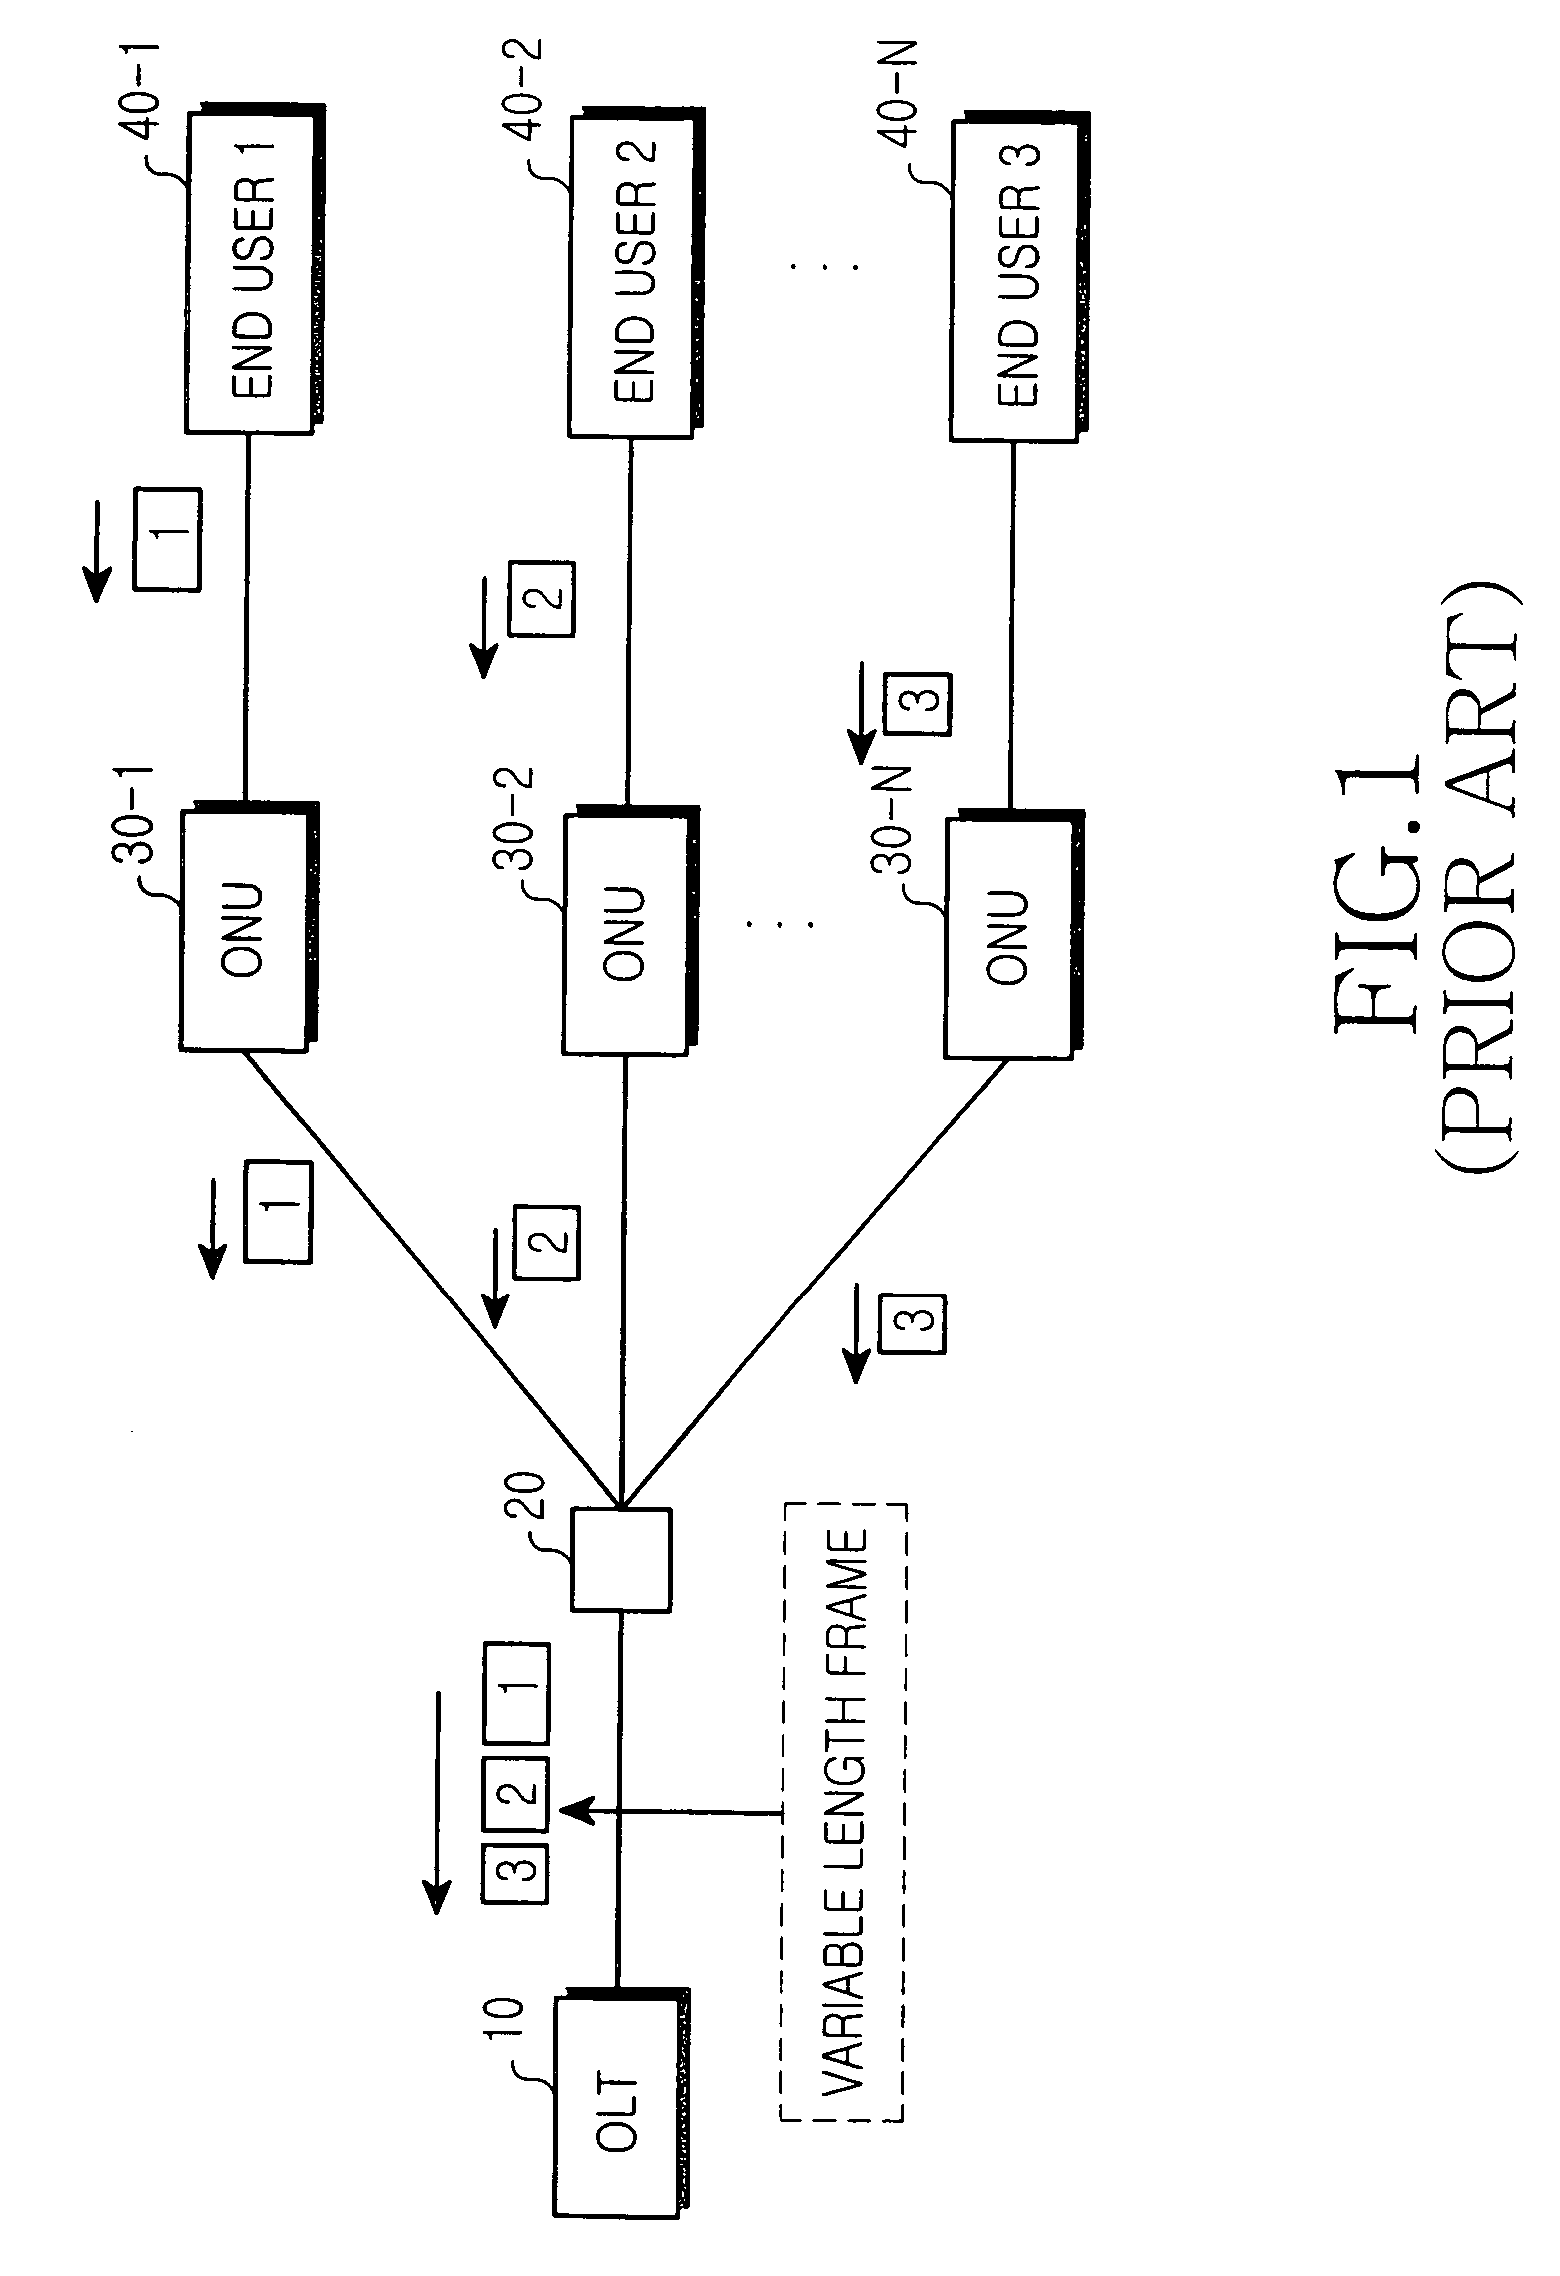 Dynamic bandwidth allocation method considering multiple services in ethernet passive optical network system